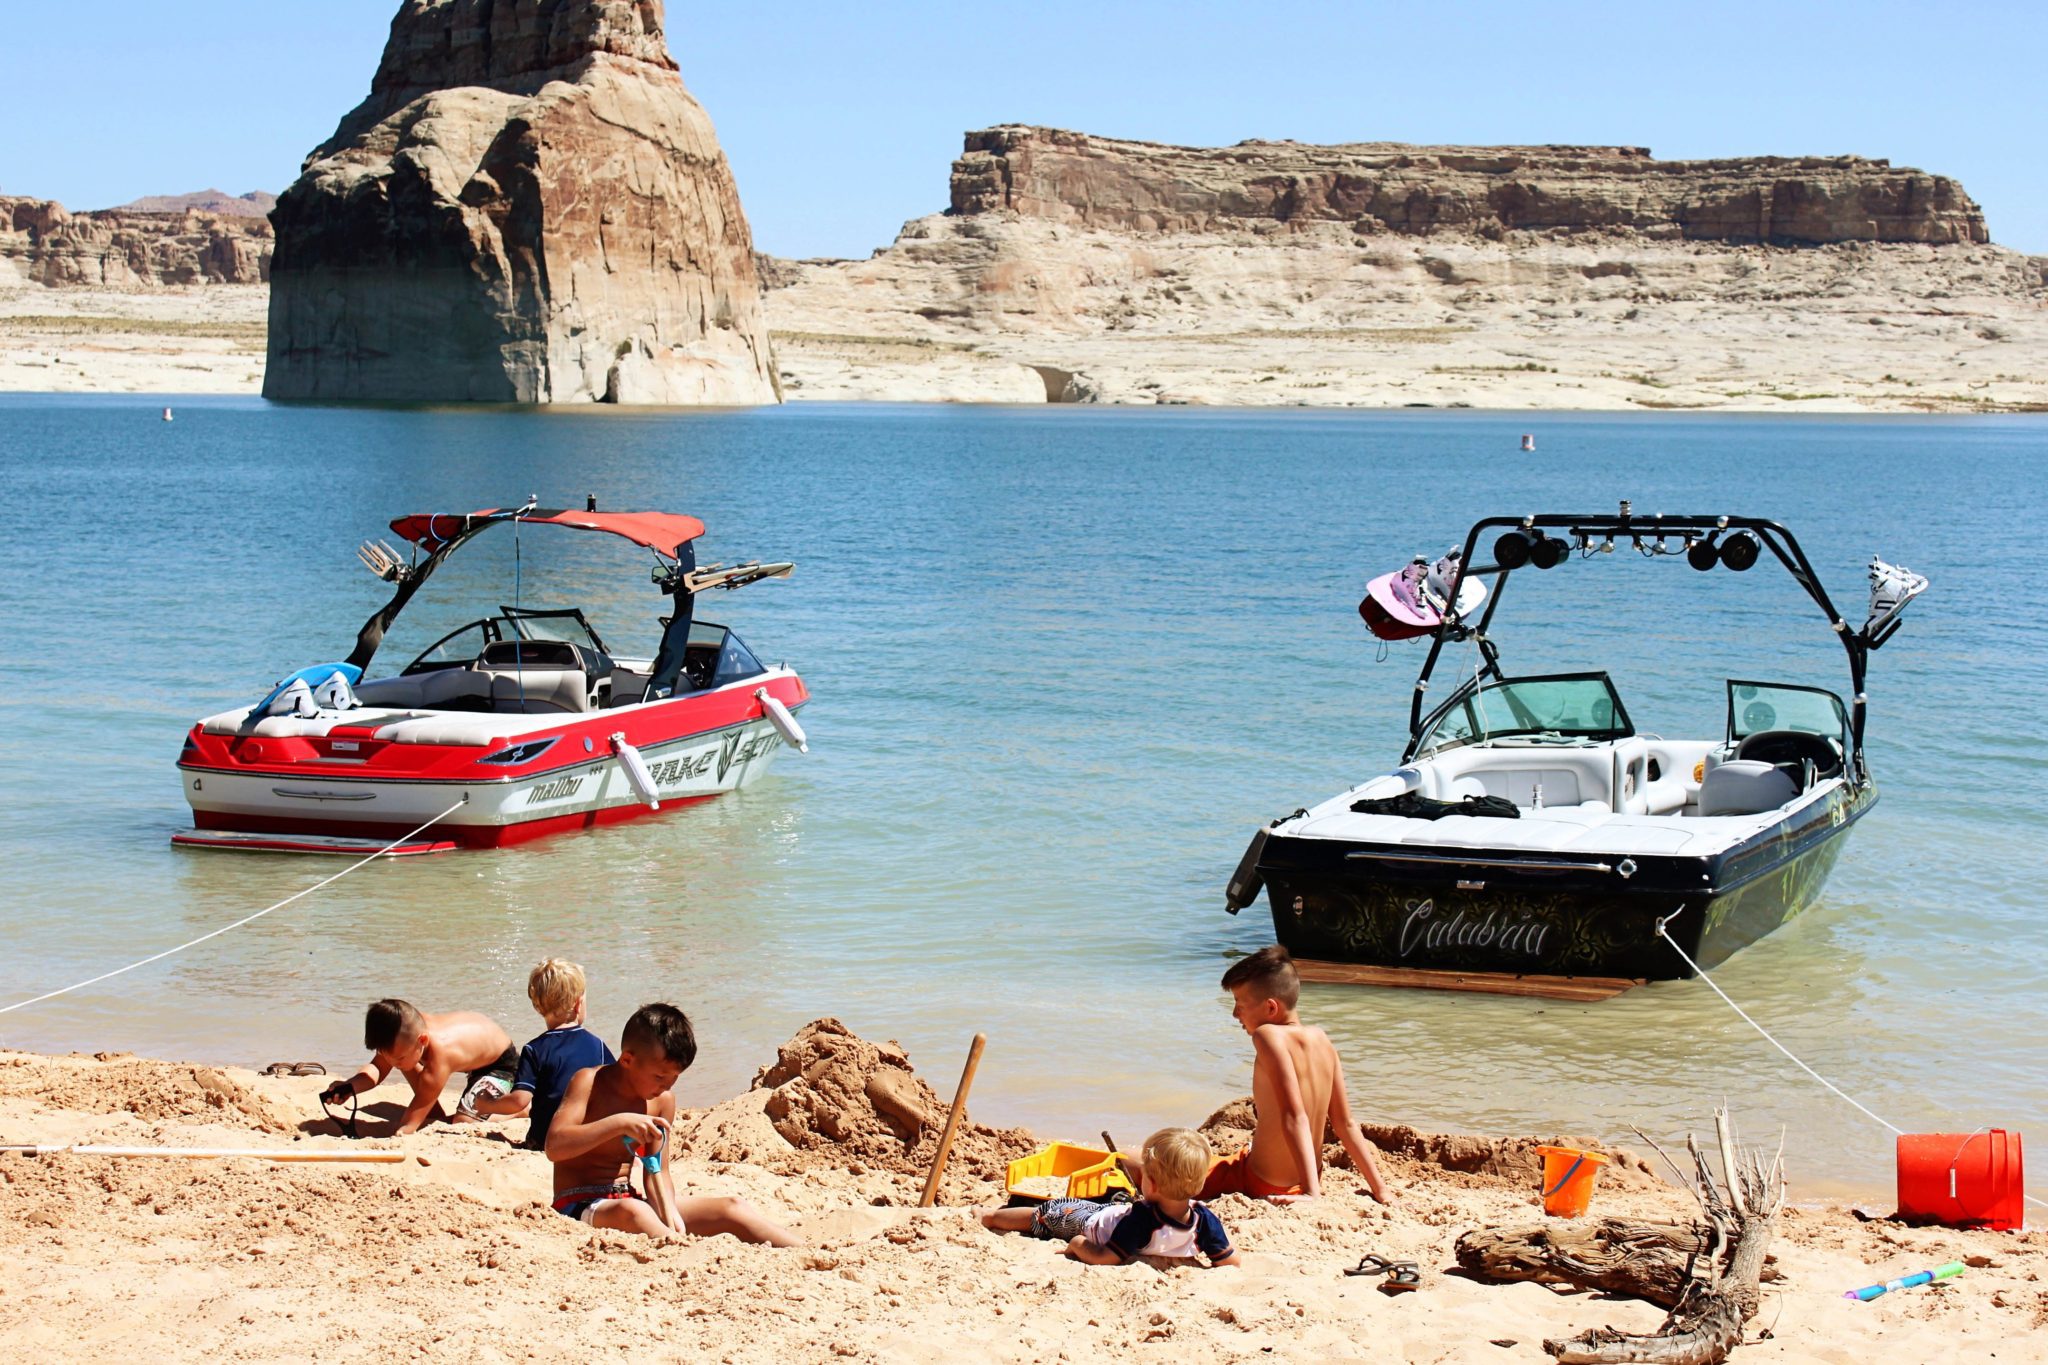 Where to stay at Lake Powell and tips for camping at Lone Rock Beach- First time guide to Lake Powell #lakepowell #utah #arizona #boating #simplywander